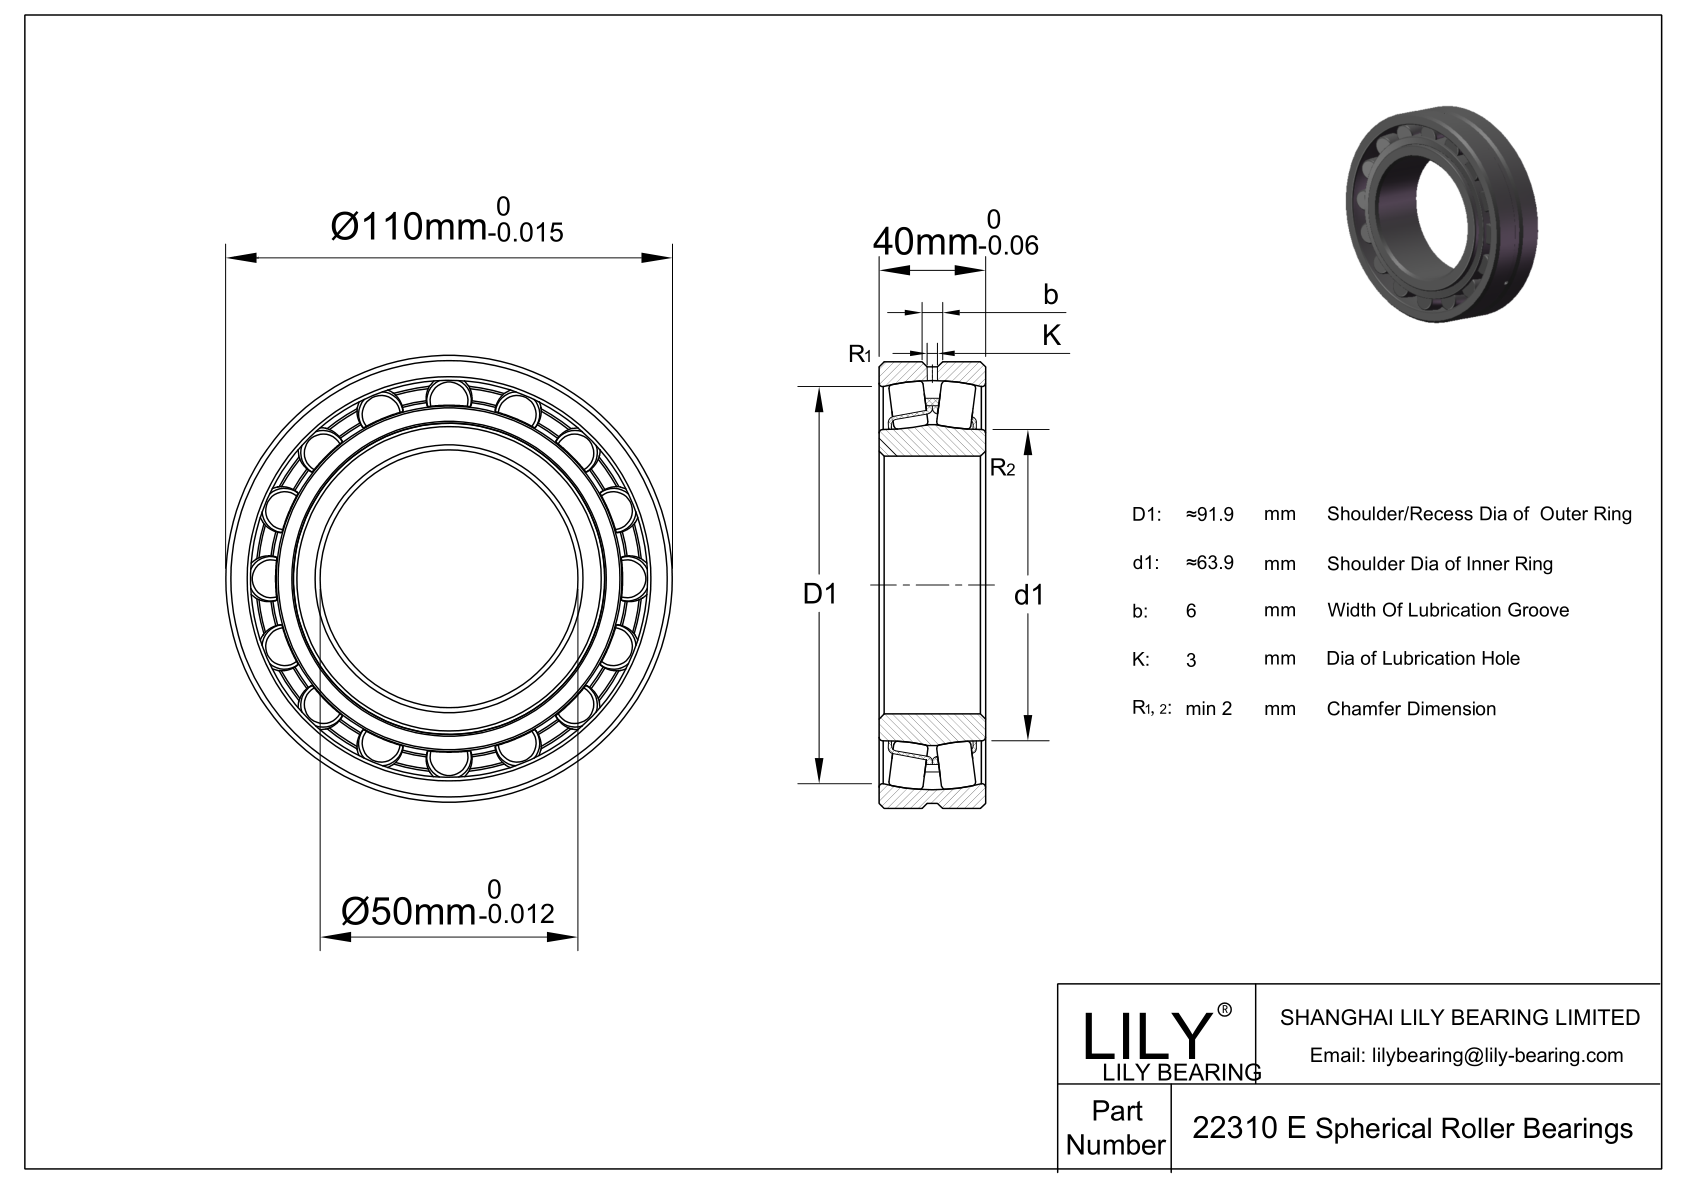 22310 E Double Row Spherical Roller Bearing cad drawing